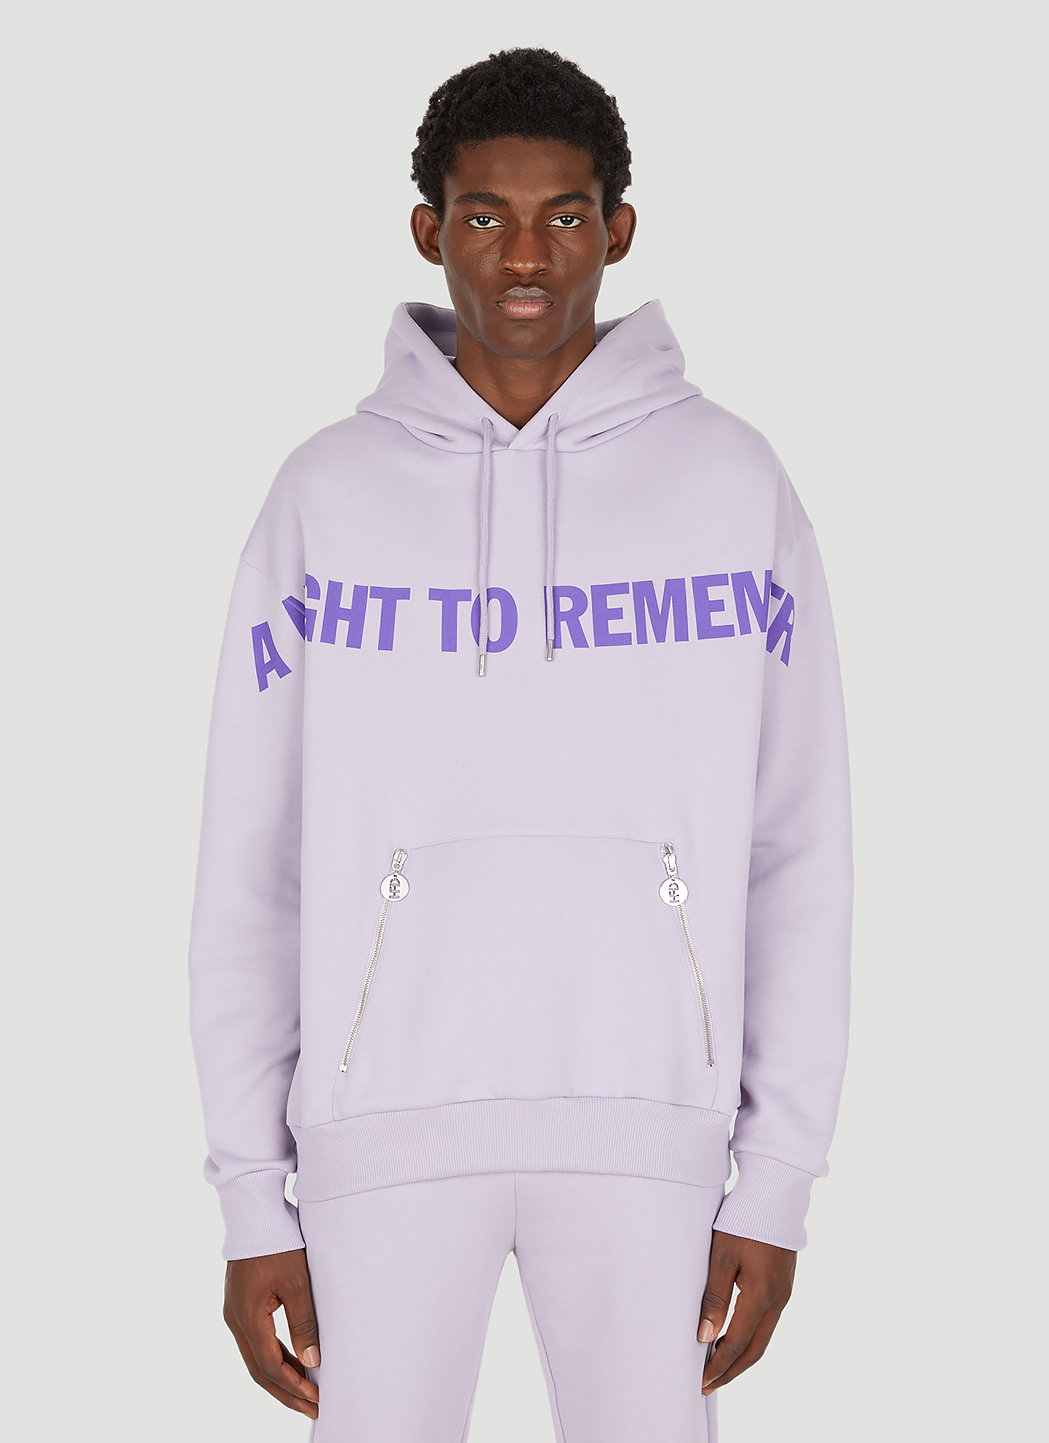 A Night To Remember Hooded Sweatshirt